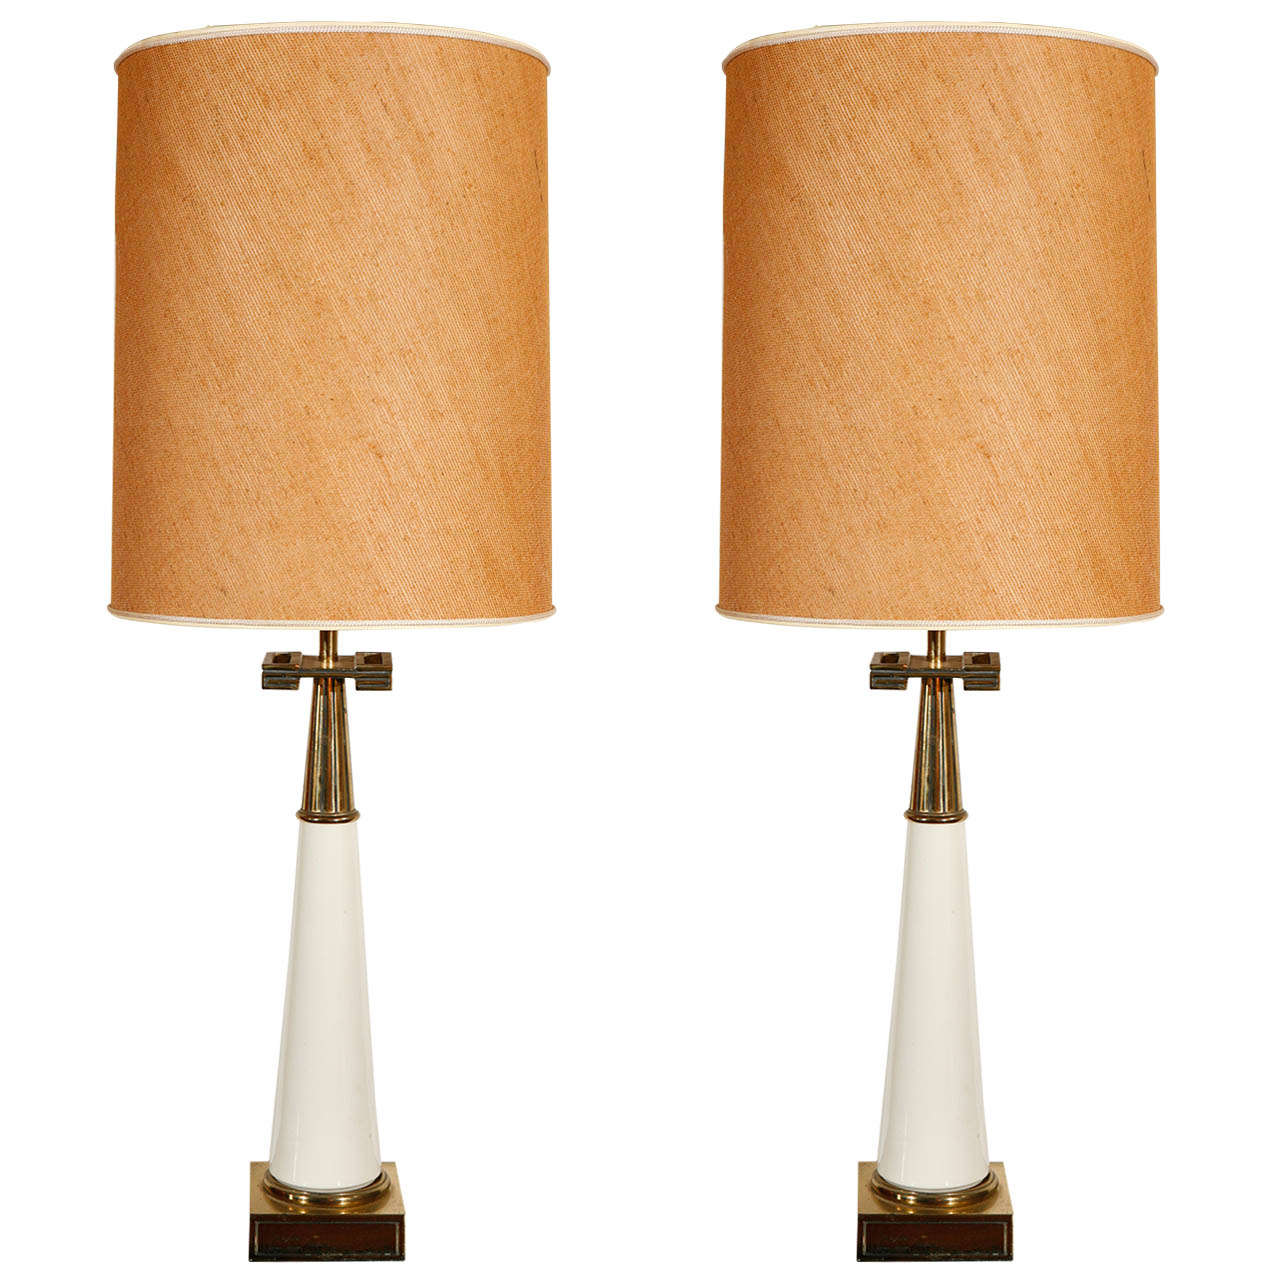 Pair of Stiffel Brass and Porcelain Lamps with Original Shades